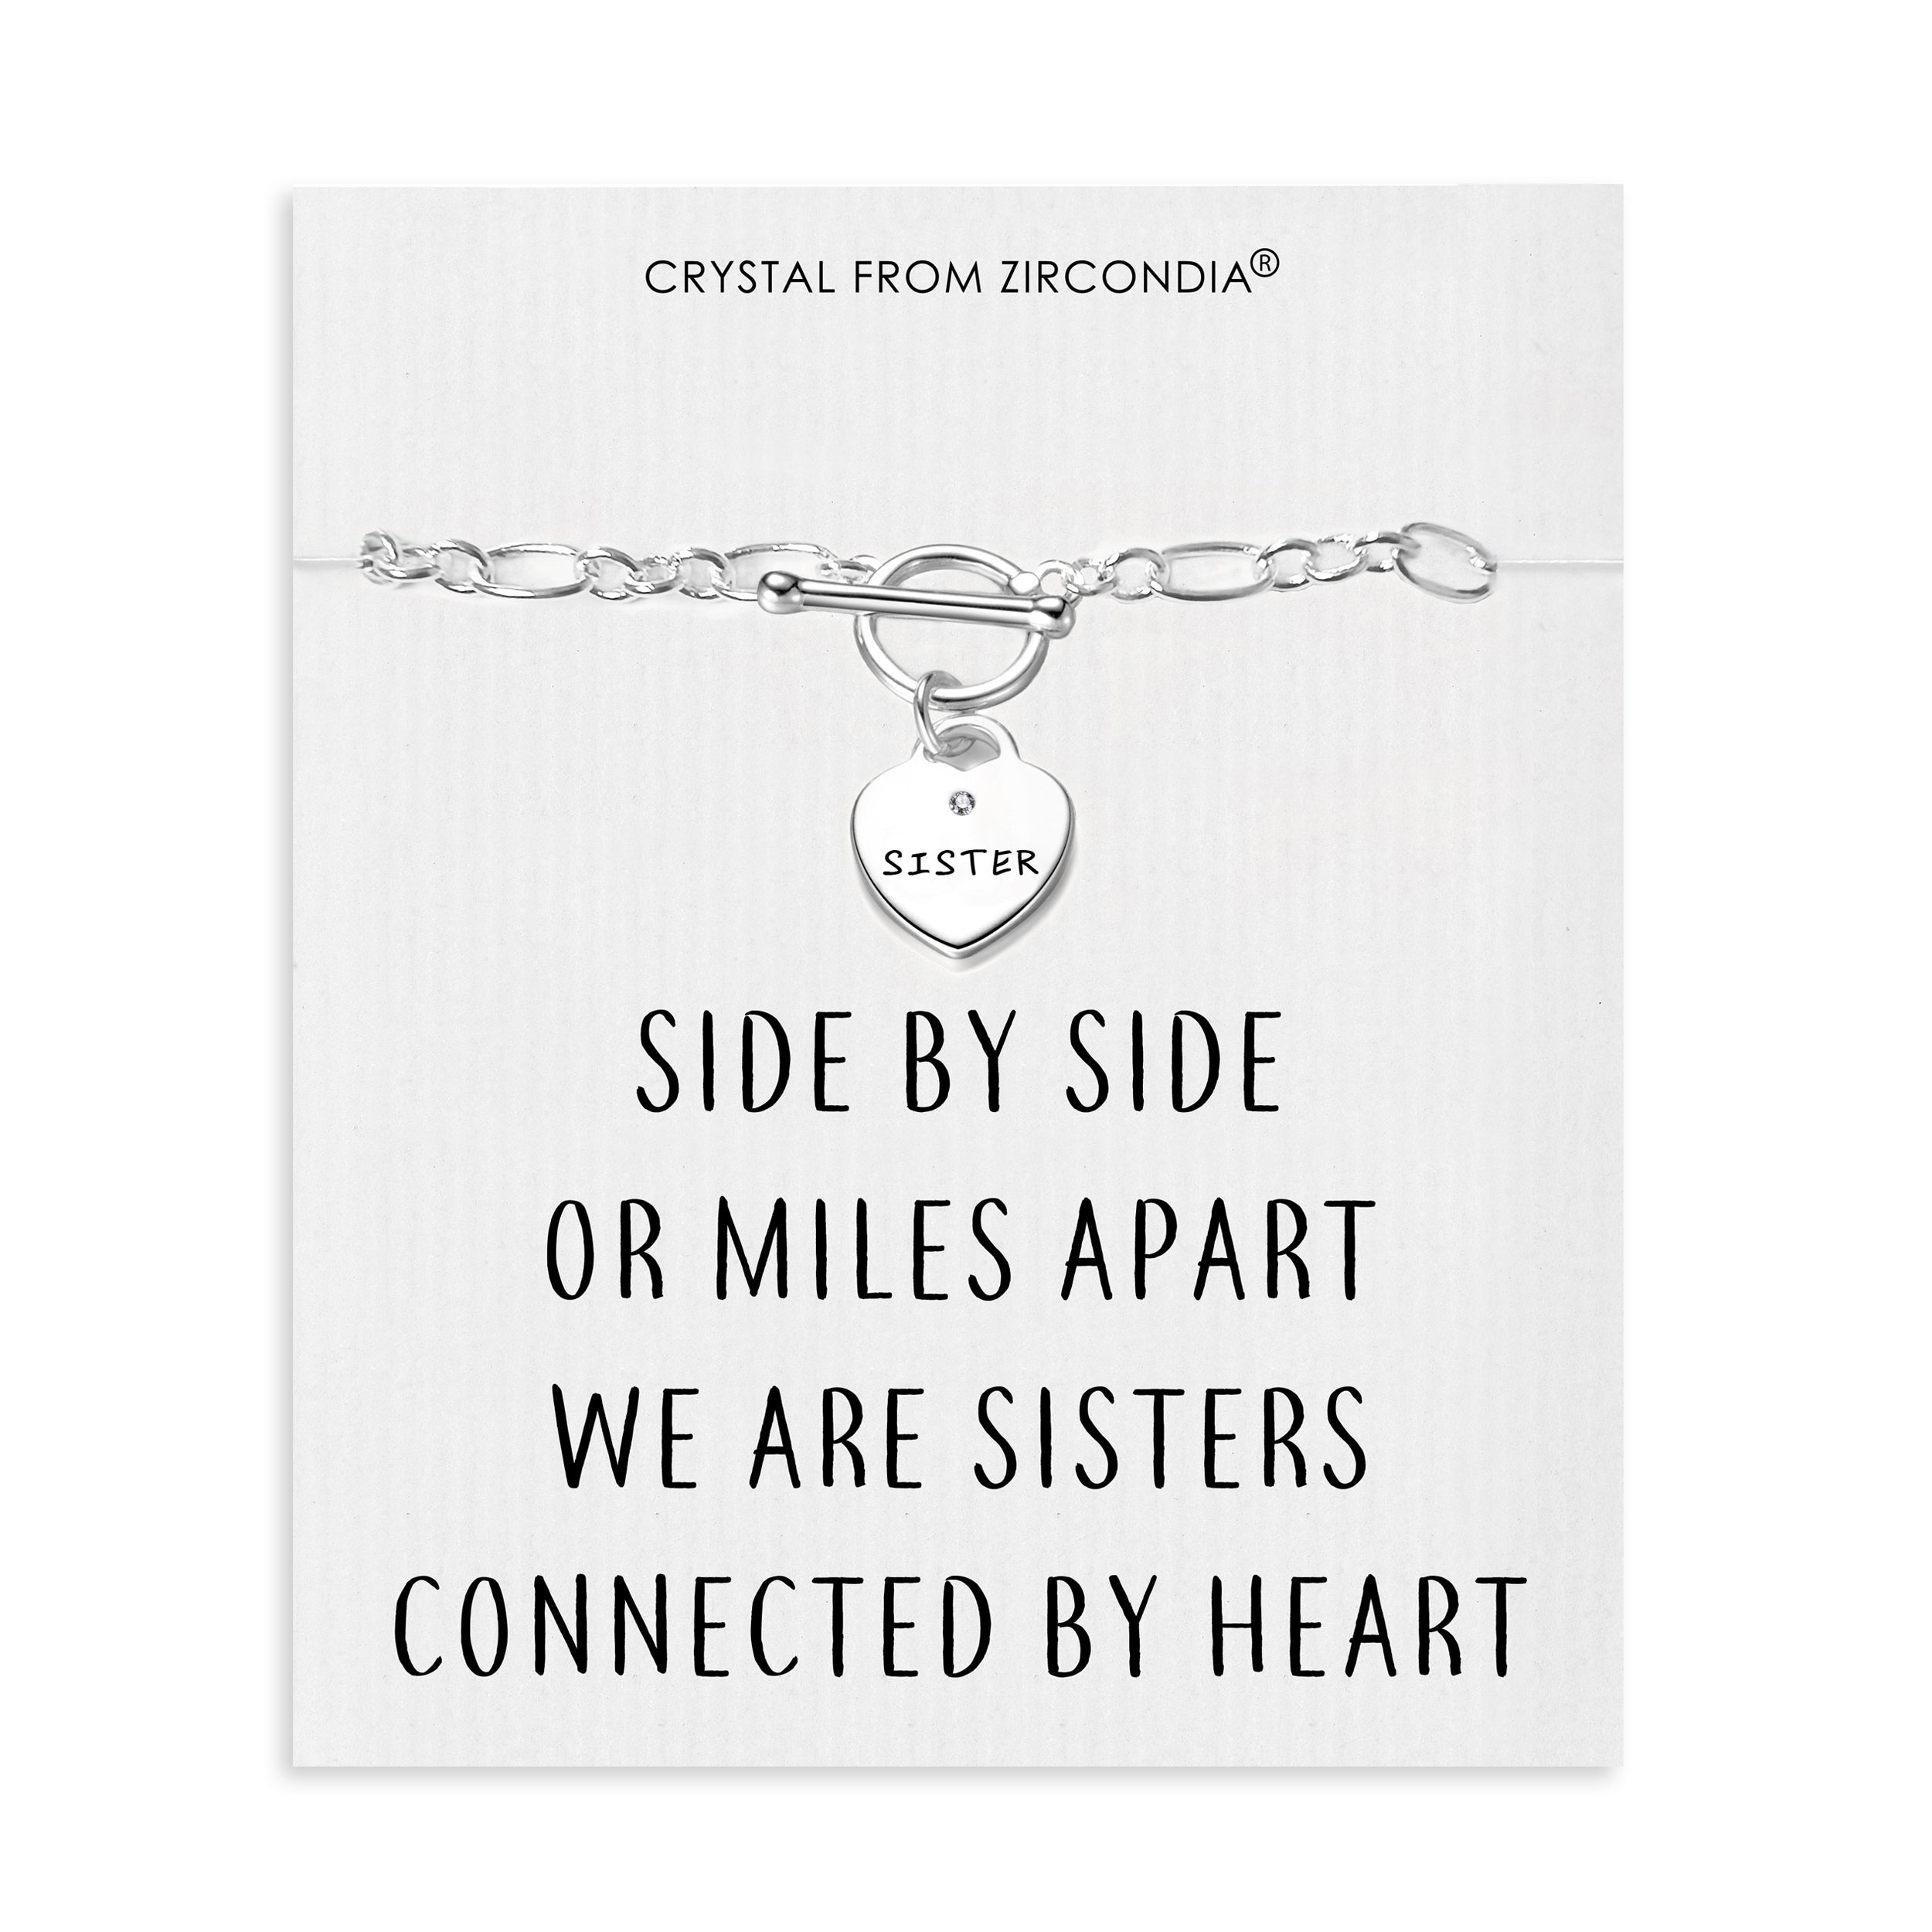 Sister Charm Bracelet with Quote Card Created with Zircondia® Crystals by Philip Jones Jewellery